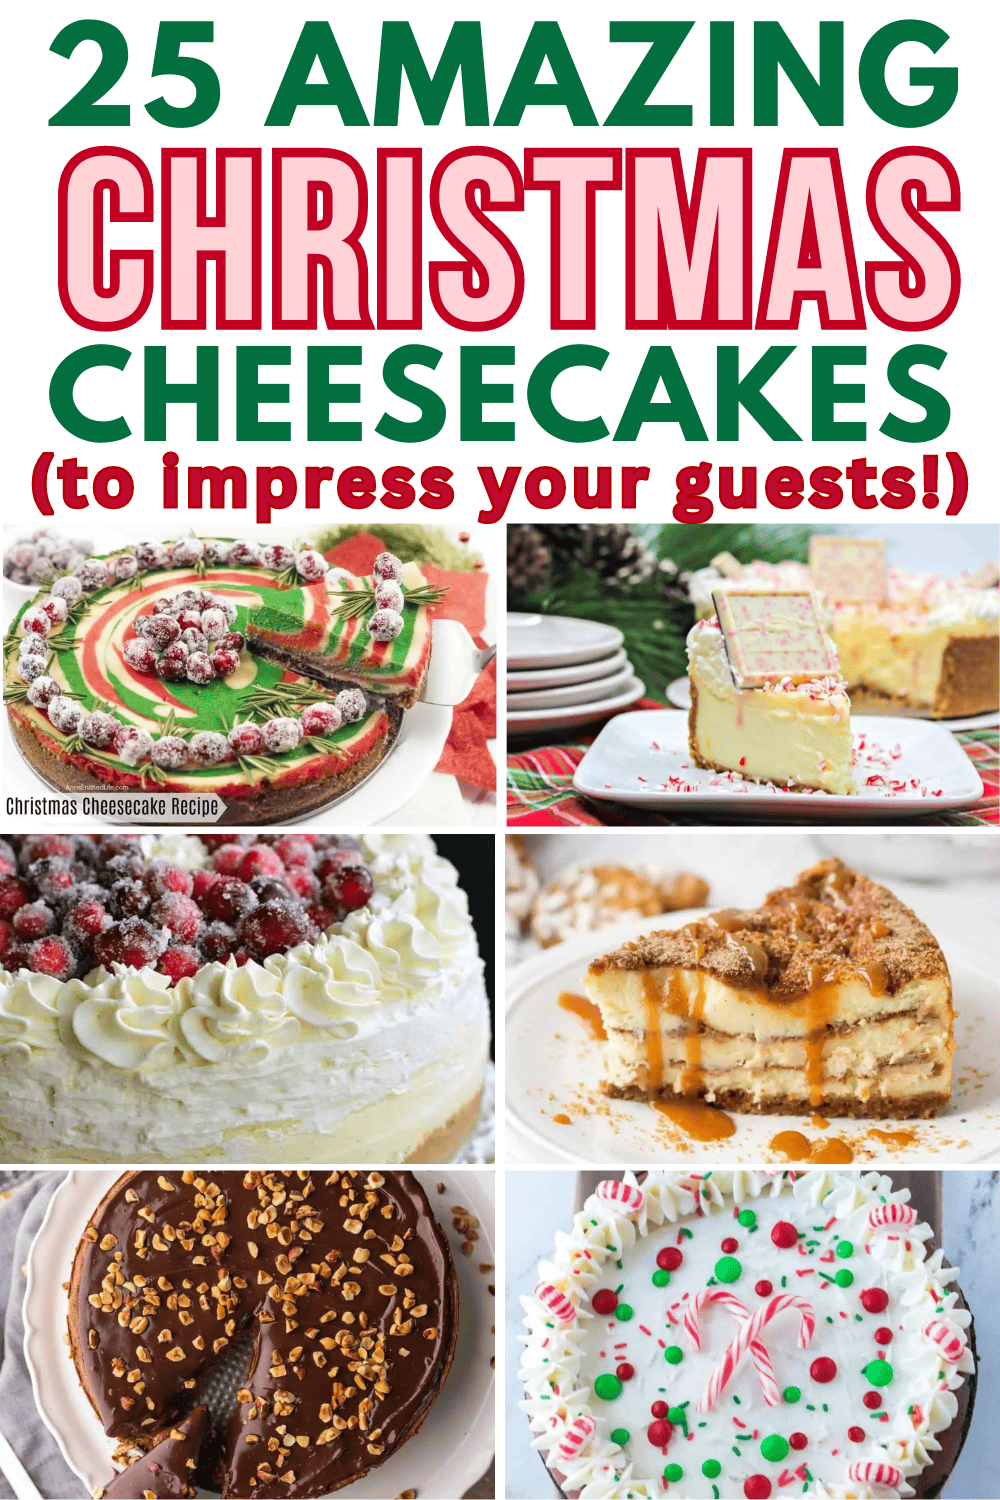 The best Christmas cheesecake recipes! These easy Christmas cheesecake recipes are easy Christmas dessert recipes for a crowd. Easy holiday cheesecake recipes christmas, best holiday desserts christmas, christmas cheesecake no bake easy recipes, little debbie christmas tree cheesecake recipe, gingerbread cheesecake recipes no bake, peppermint cheesecake recipes easy, christmas cranberry cheesecake recipes, holiday baking ideas christmas easy, christmas cheesecake decoration ideas.